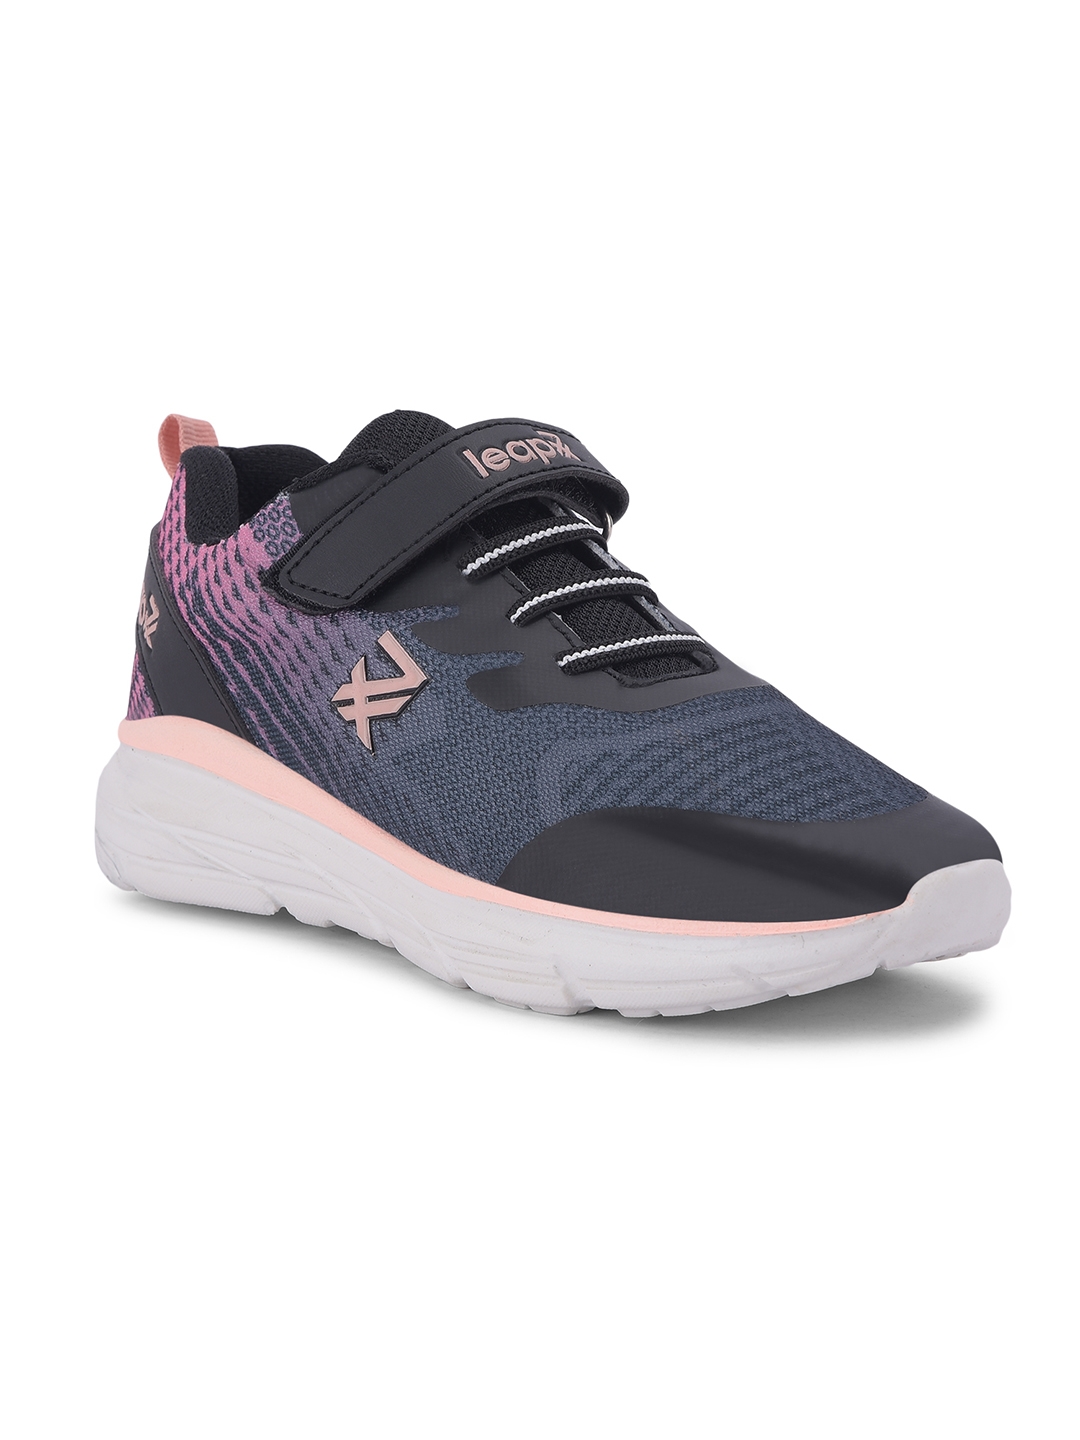 LEAP7X by Liberty KIMSER-E Black Running Shoes for Kids